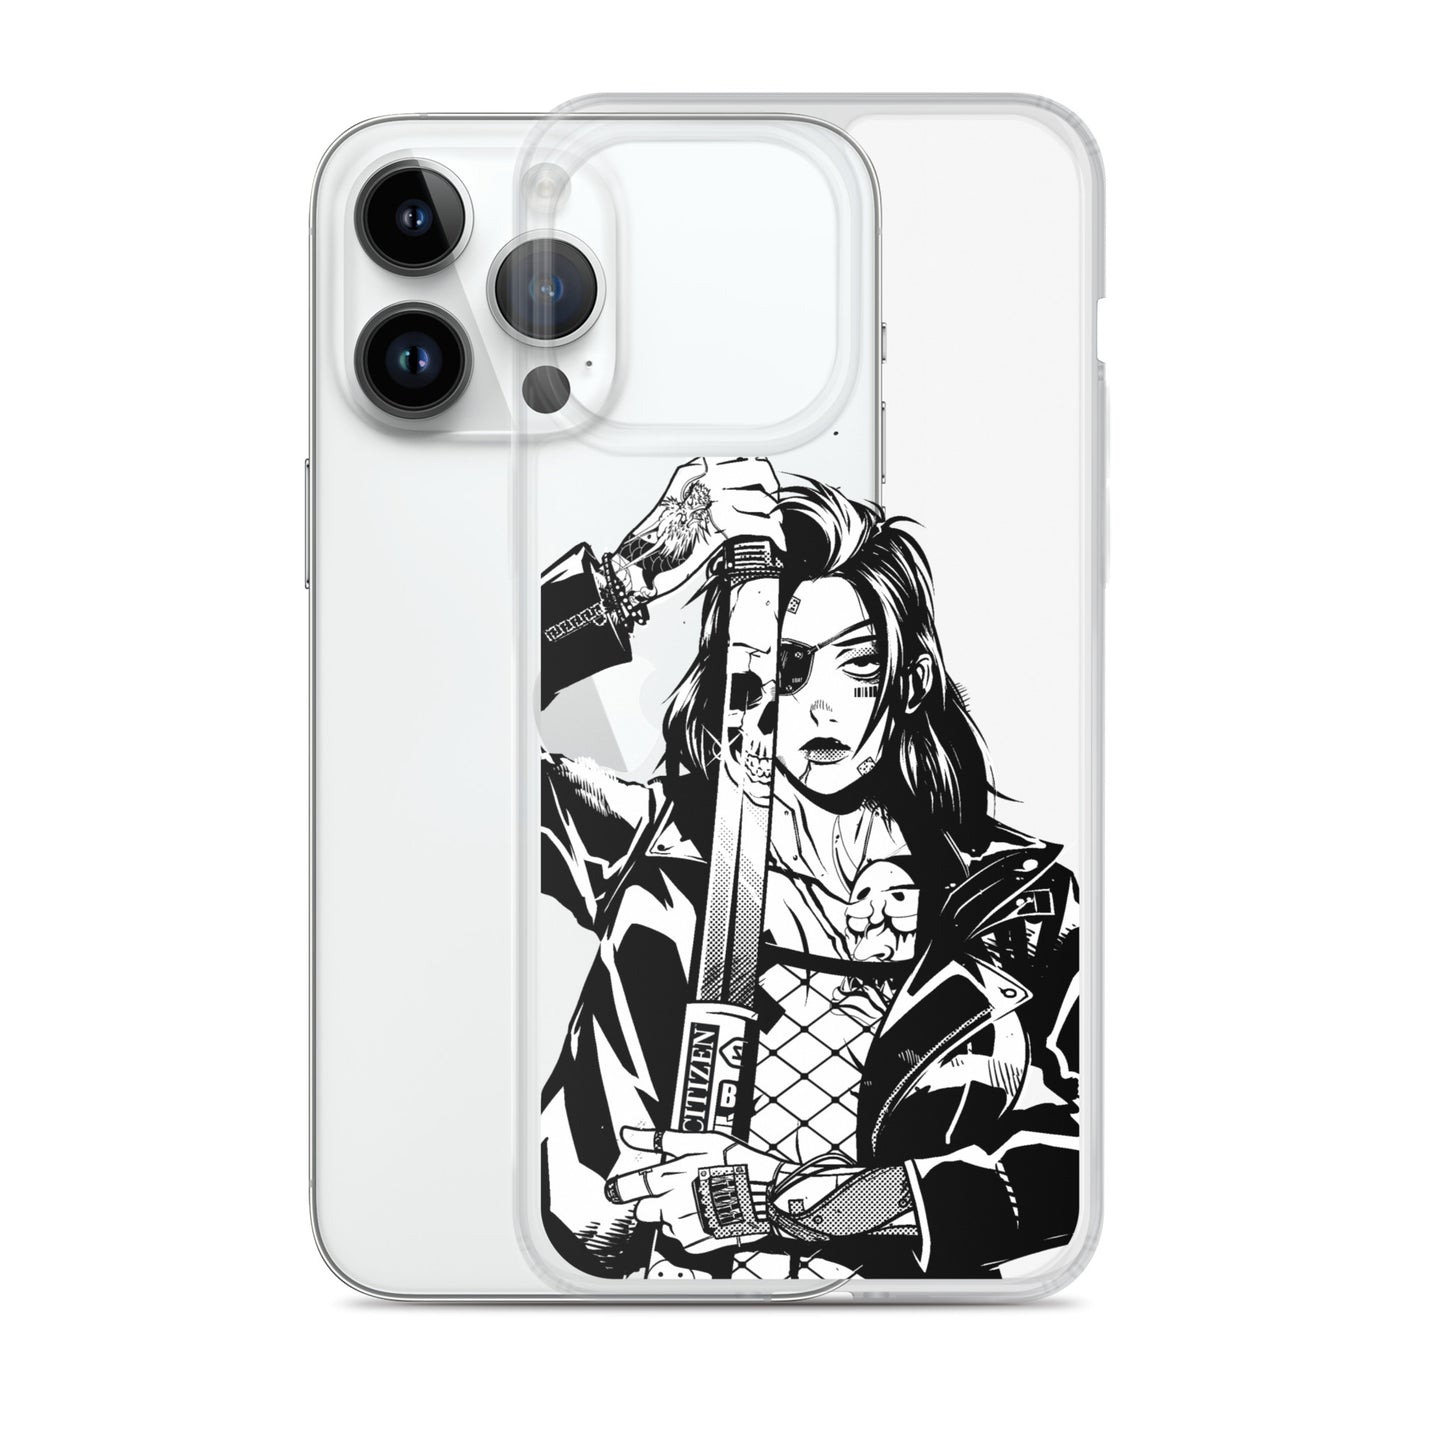 death cyber iphone case